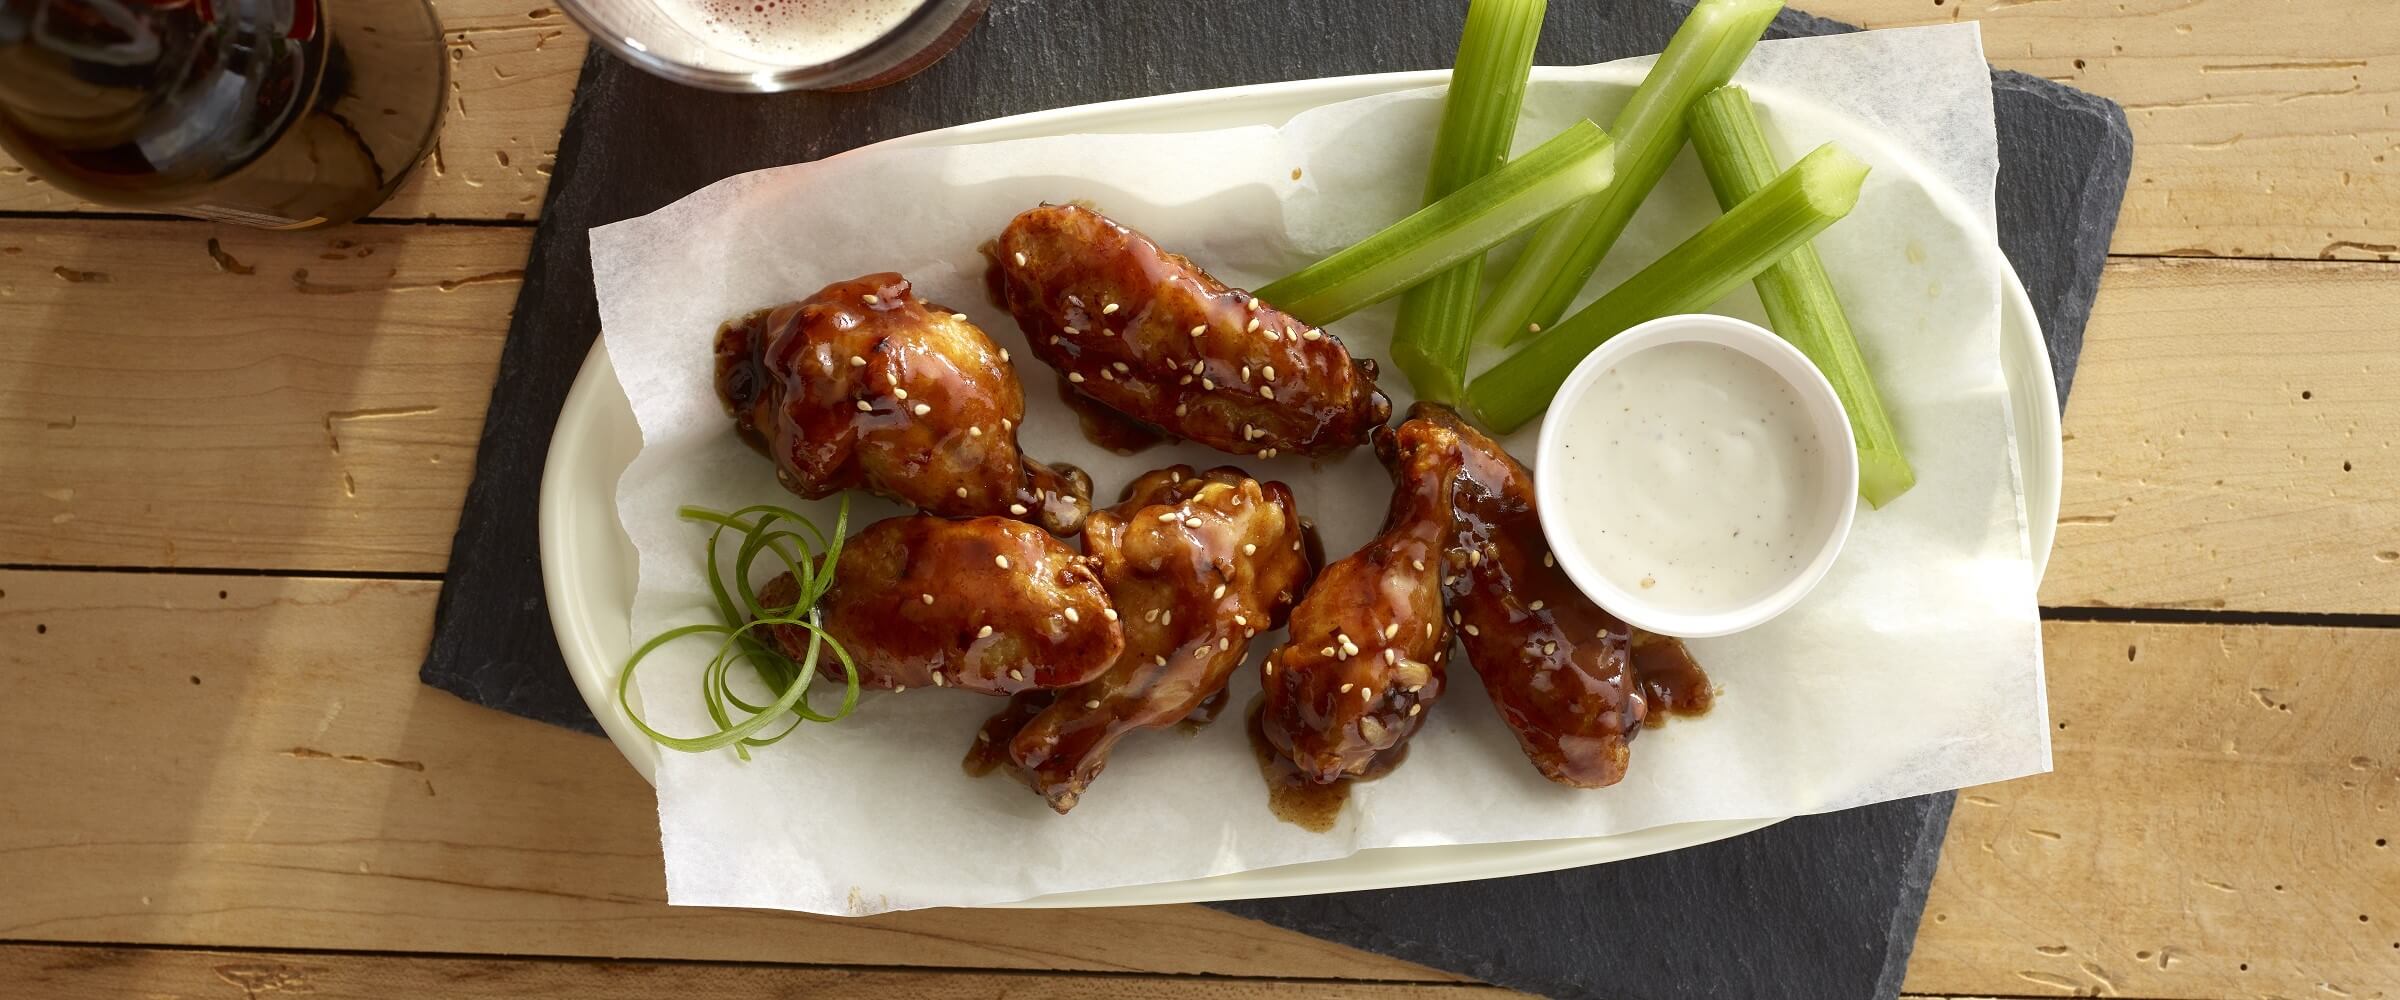 spicy szechuan hot wings in basket with celery and ranch dipping sauce